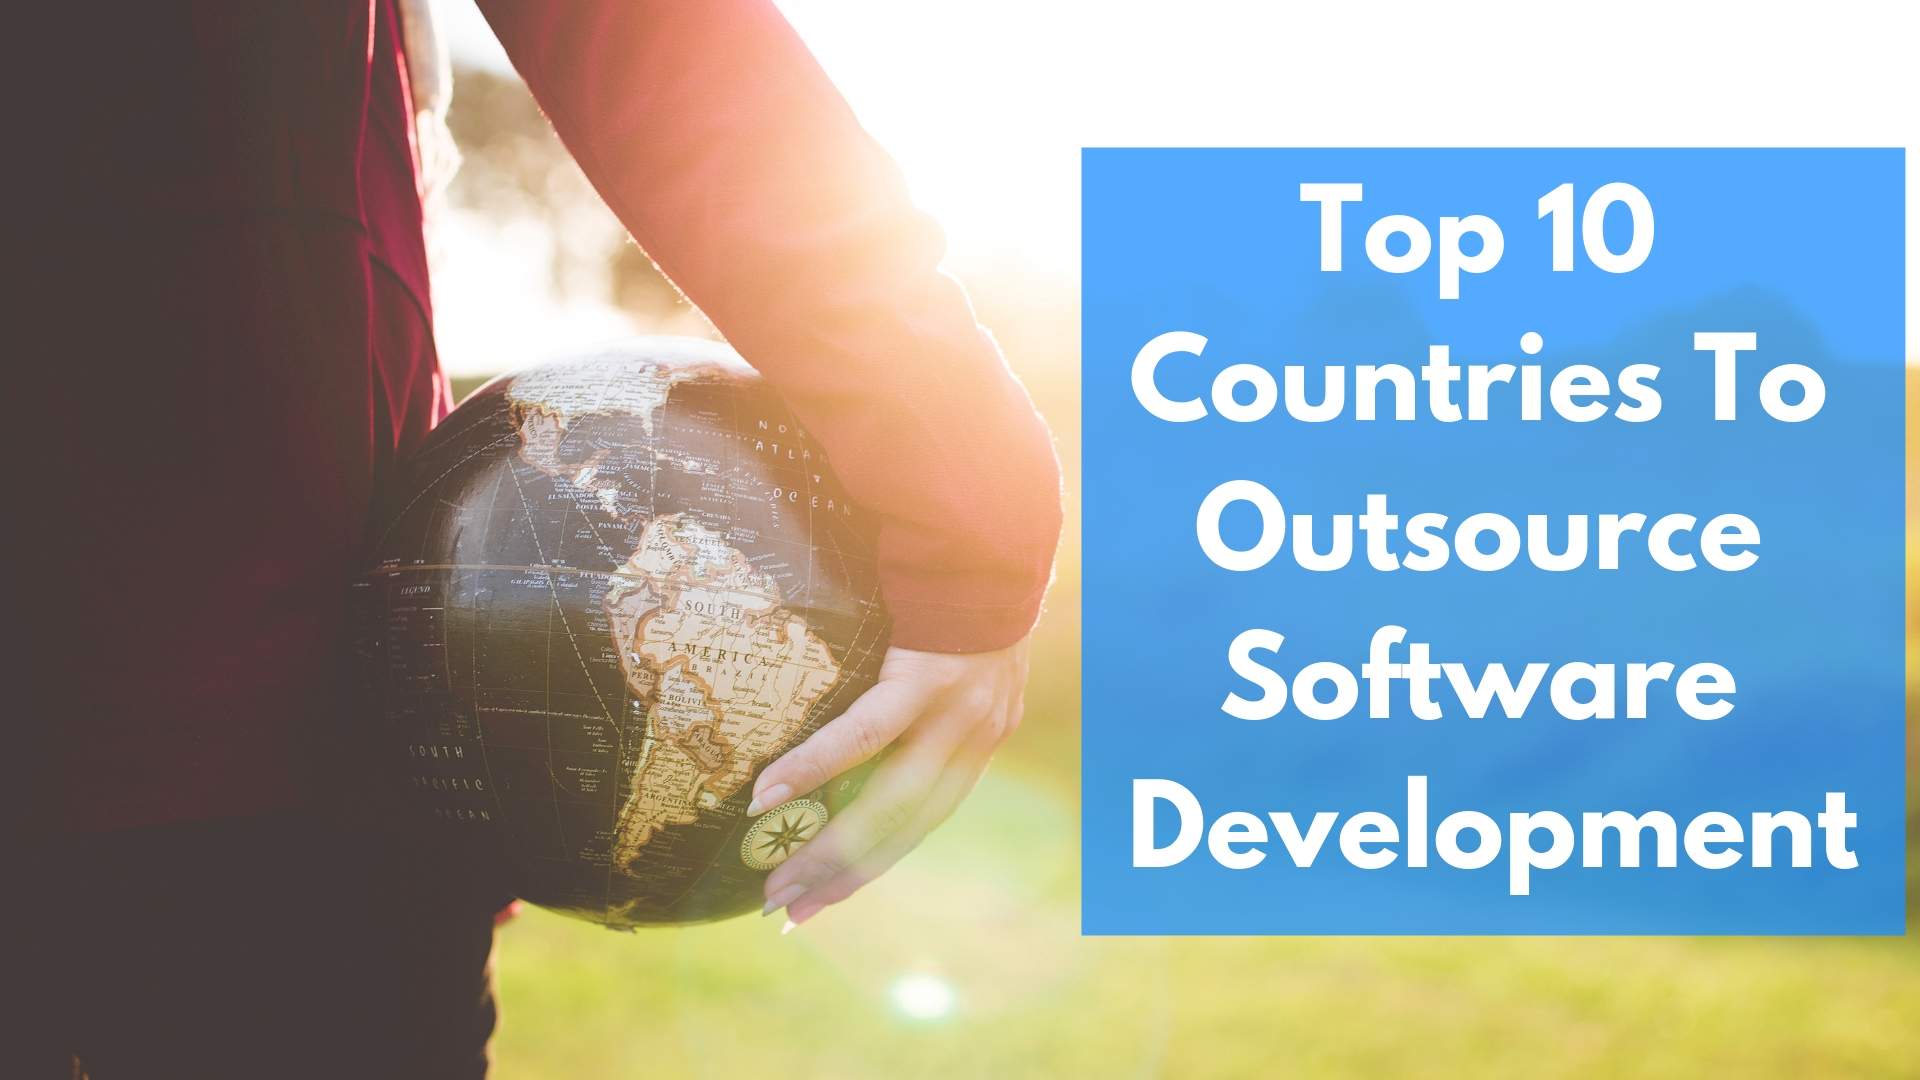 Top 10 Countries To Outsource Software Development